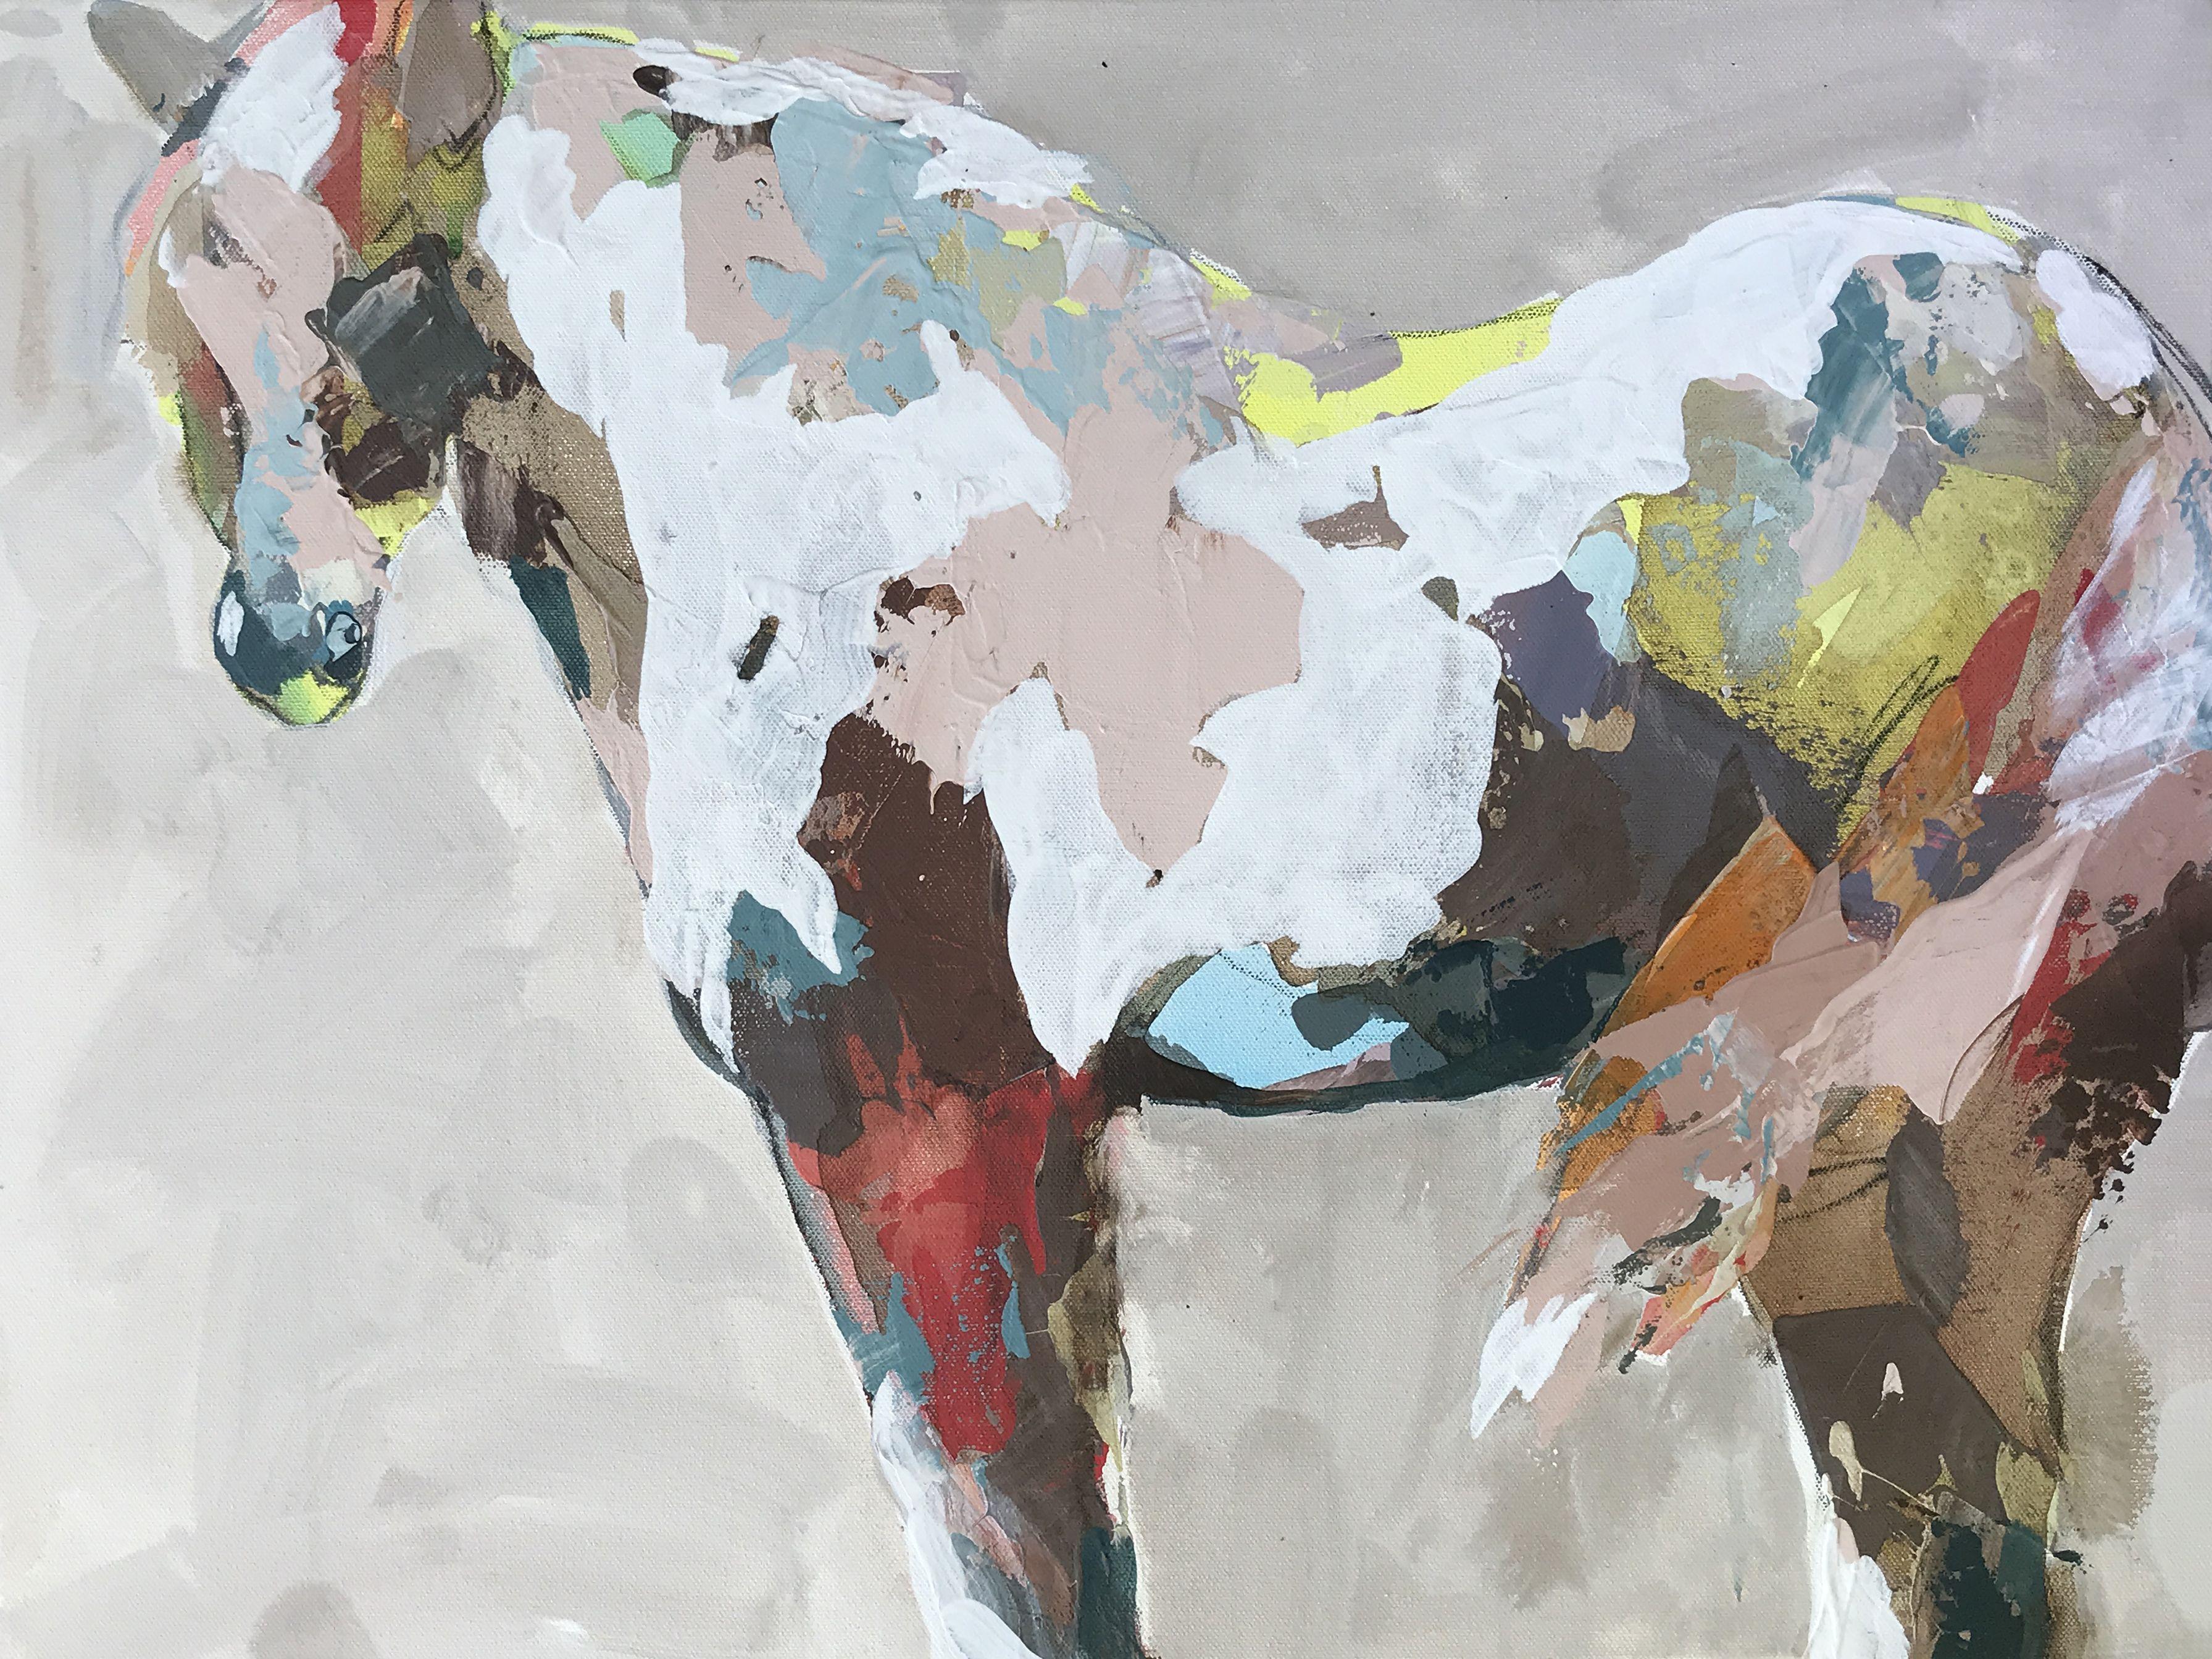 Playing with paint.   This is a playful piece with multiple layers of paint on canvas.  Creating an intriguing and one-of-a kind portrait of the horse that will delight for years. :: Painting :: Contemporary :: This piece comes with an official